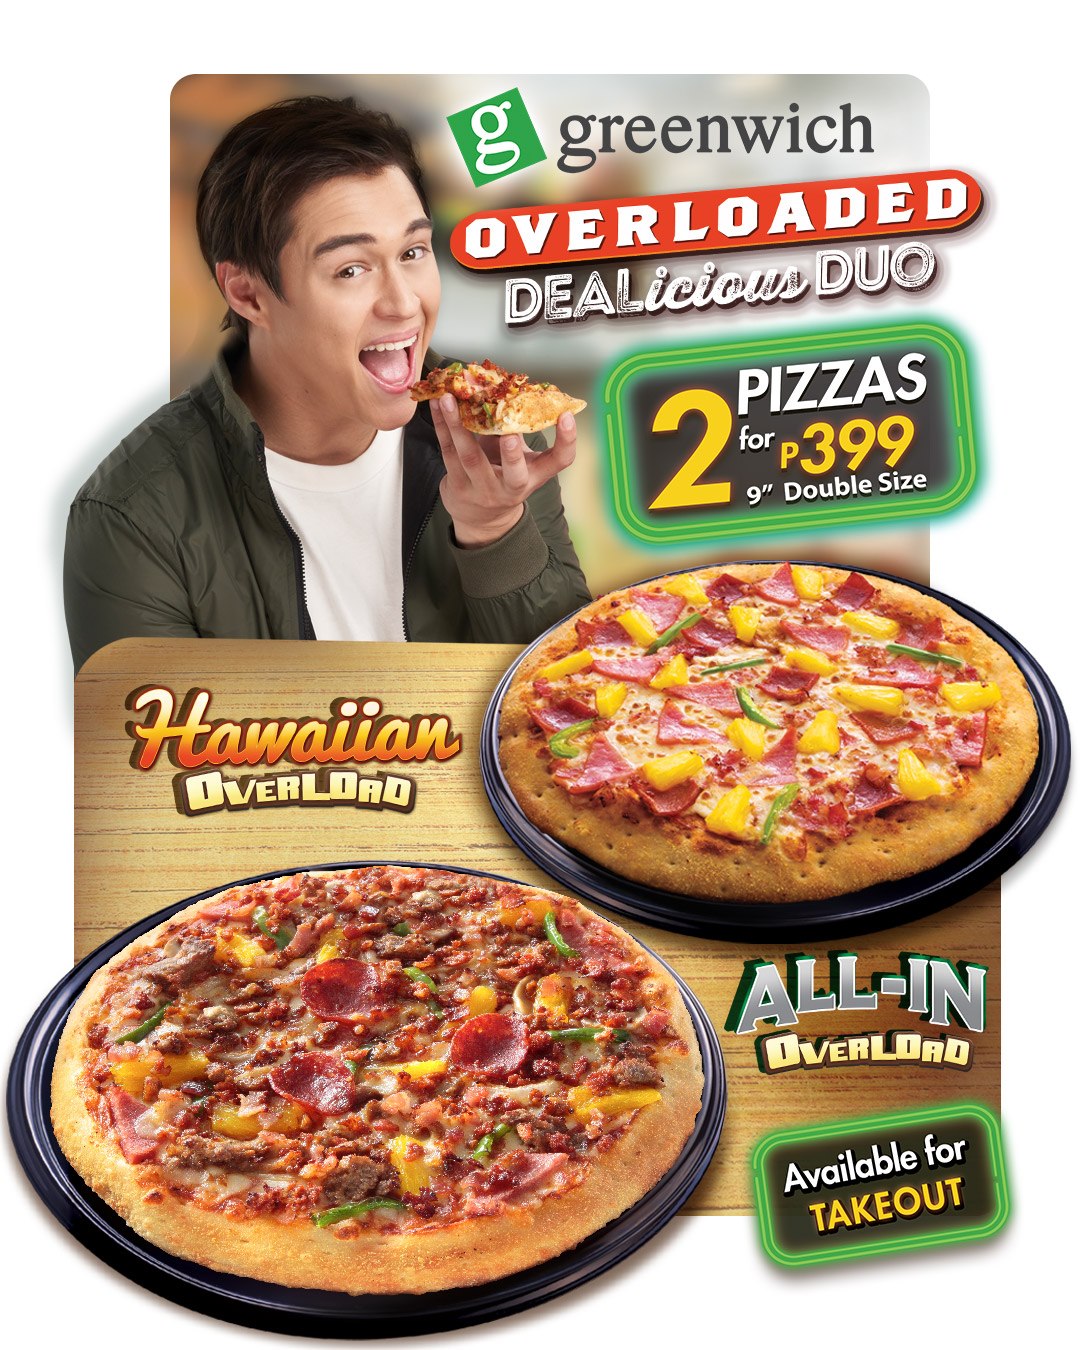 Greenwich Overloaded Dealicious Duo for Php399